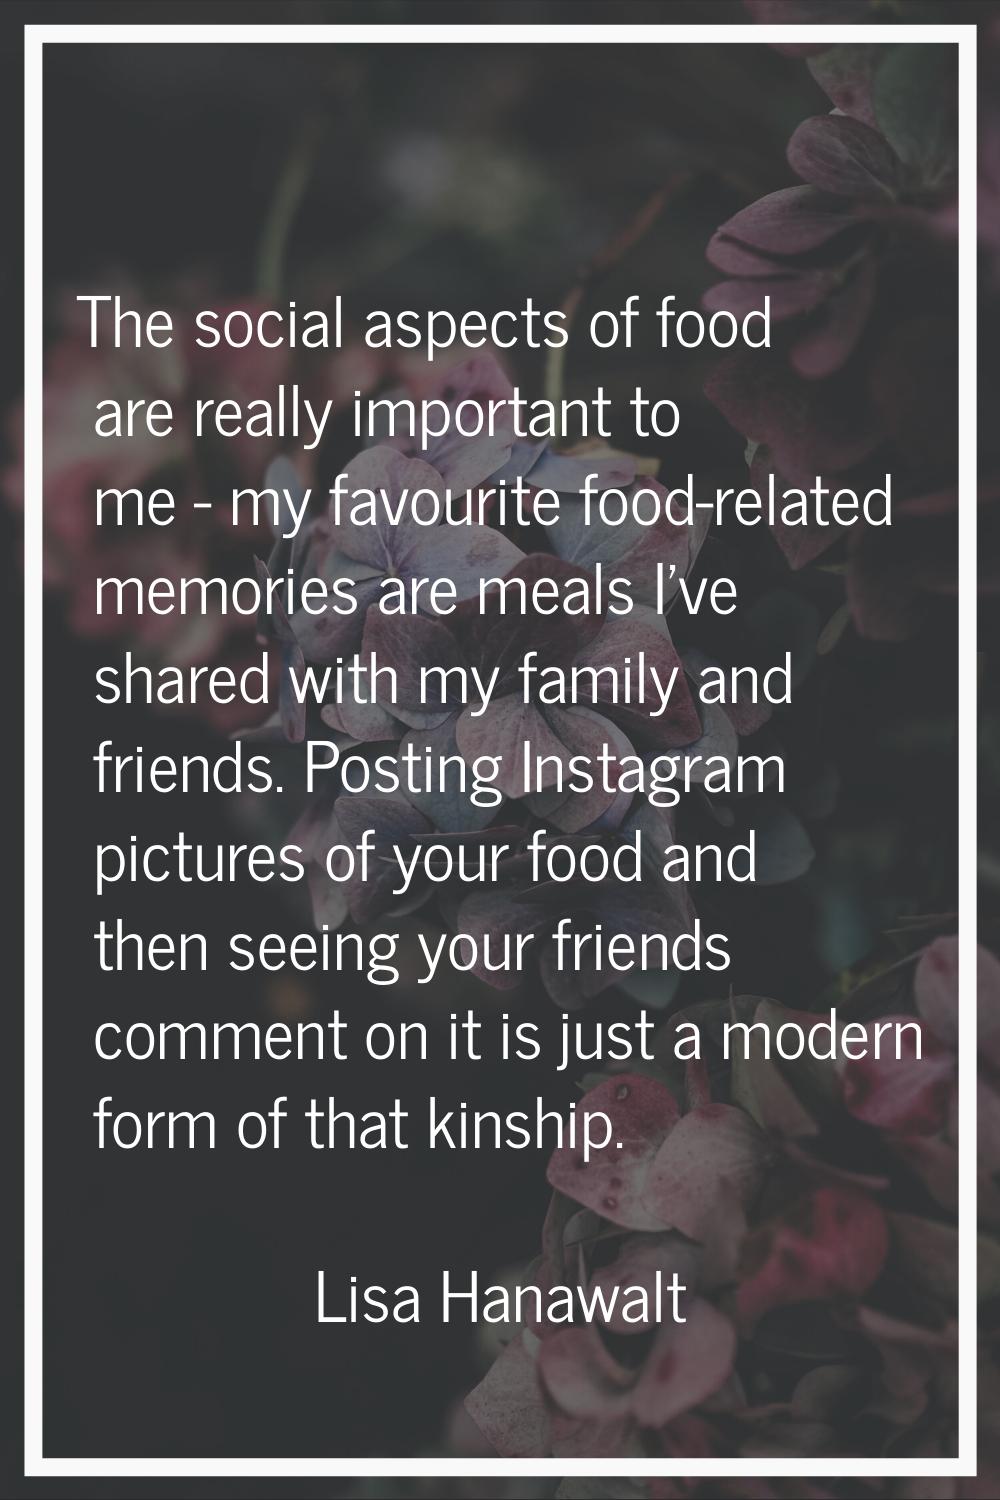 The social aspects of food are really important to me - my favourite food-related memories are meal